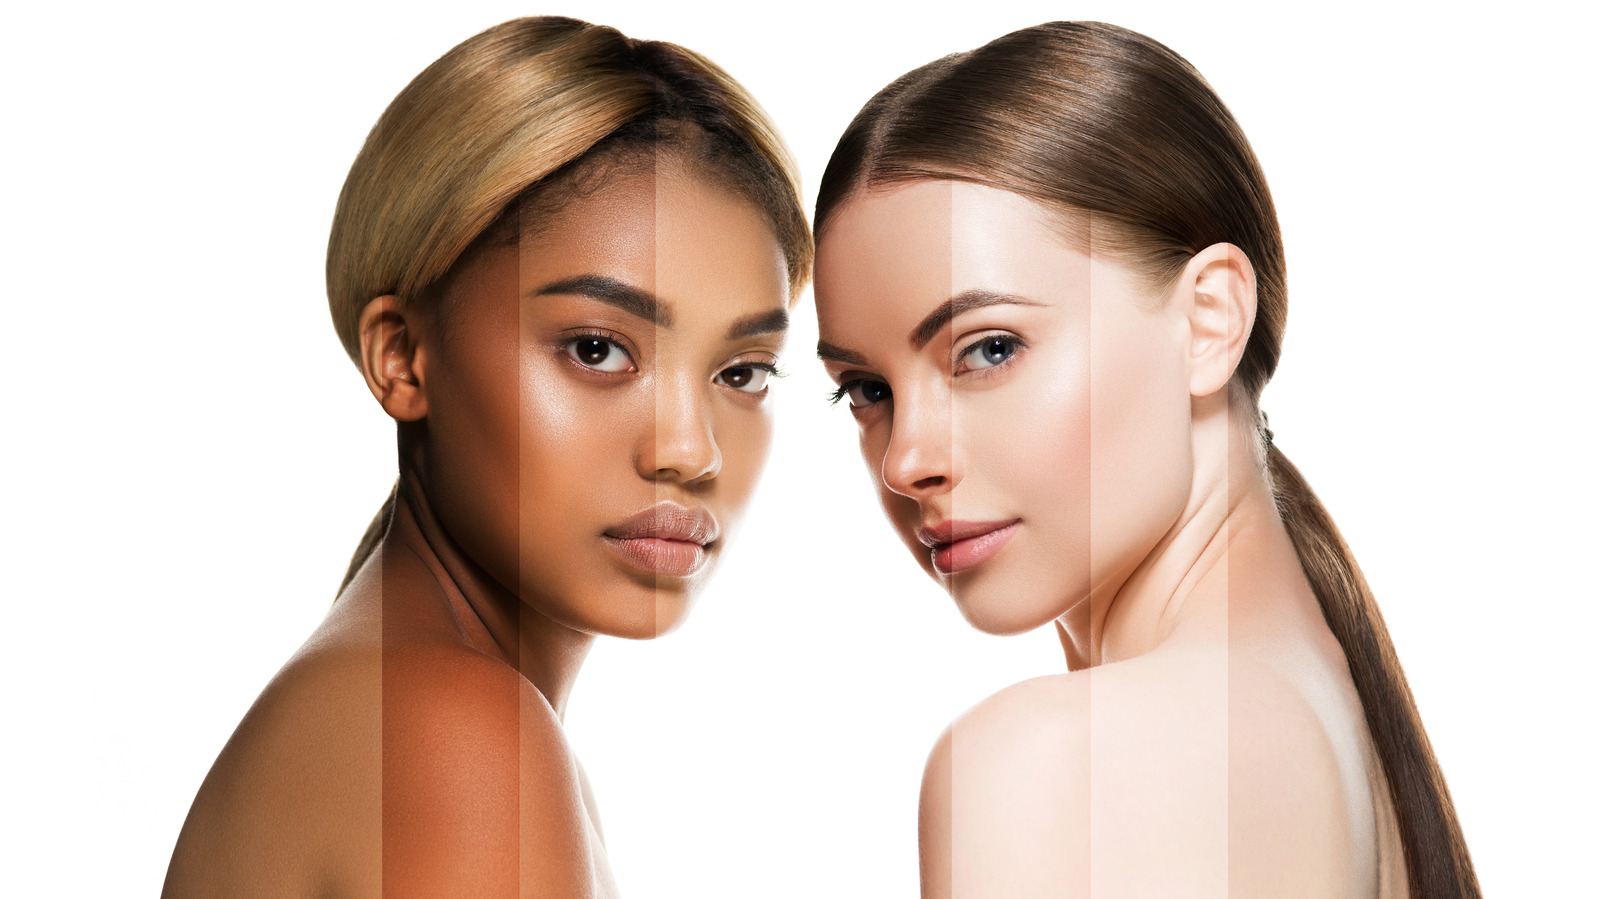 11 inclusive makeup brands with products for all skin tones - Reviewed